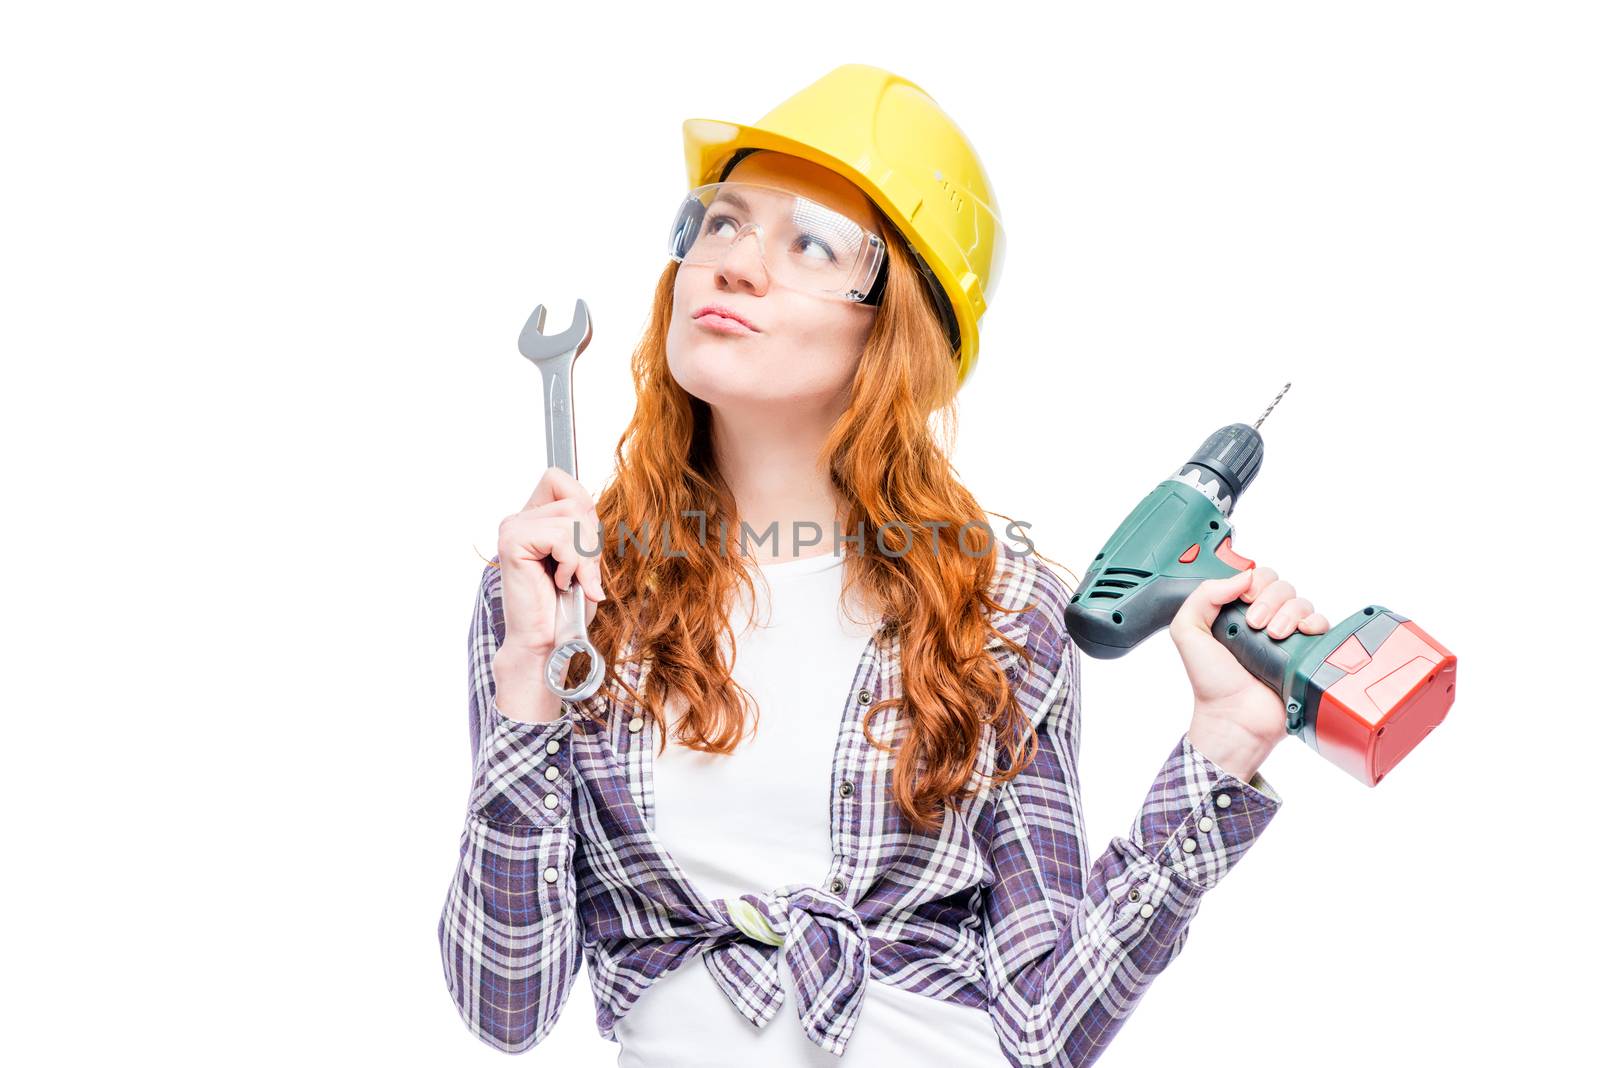 pensive woman carpenter in helmet on white background with tools